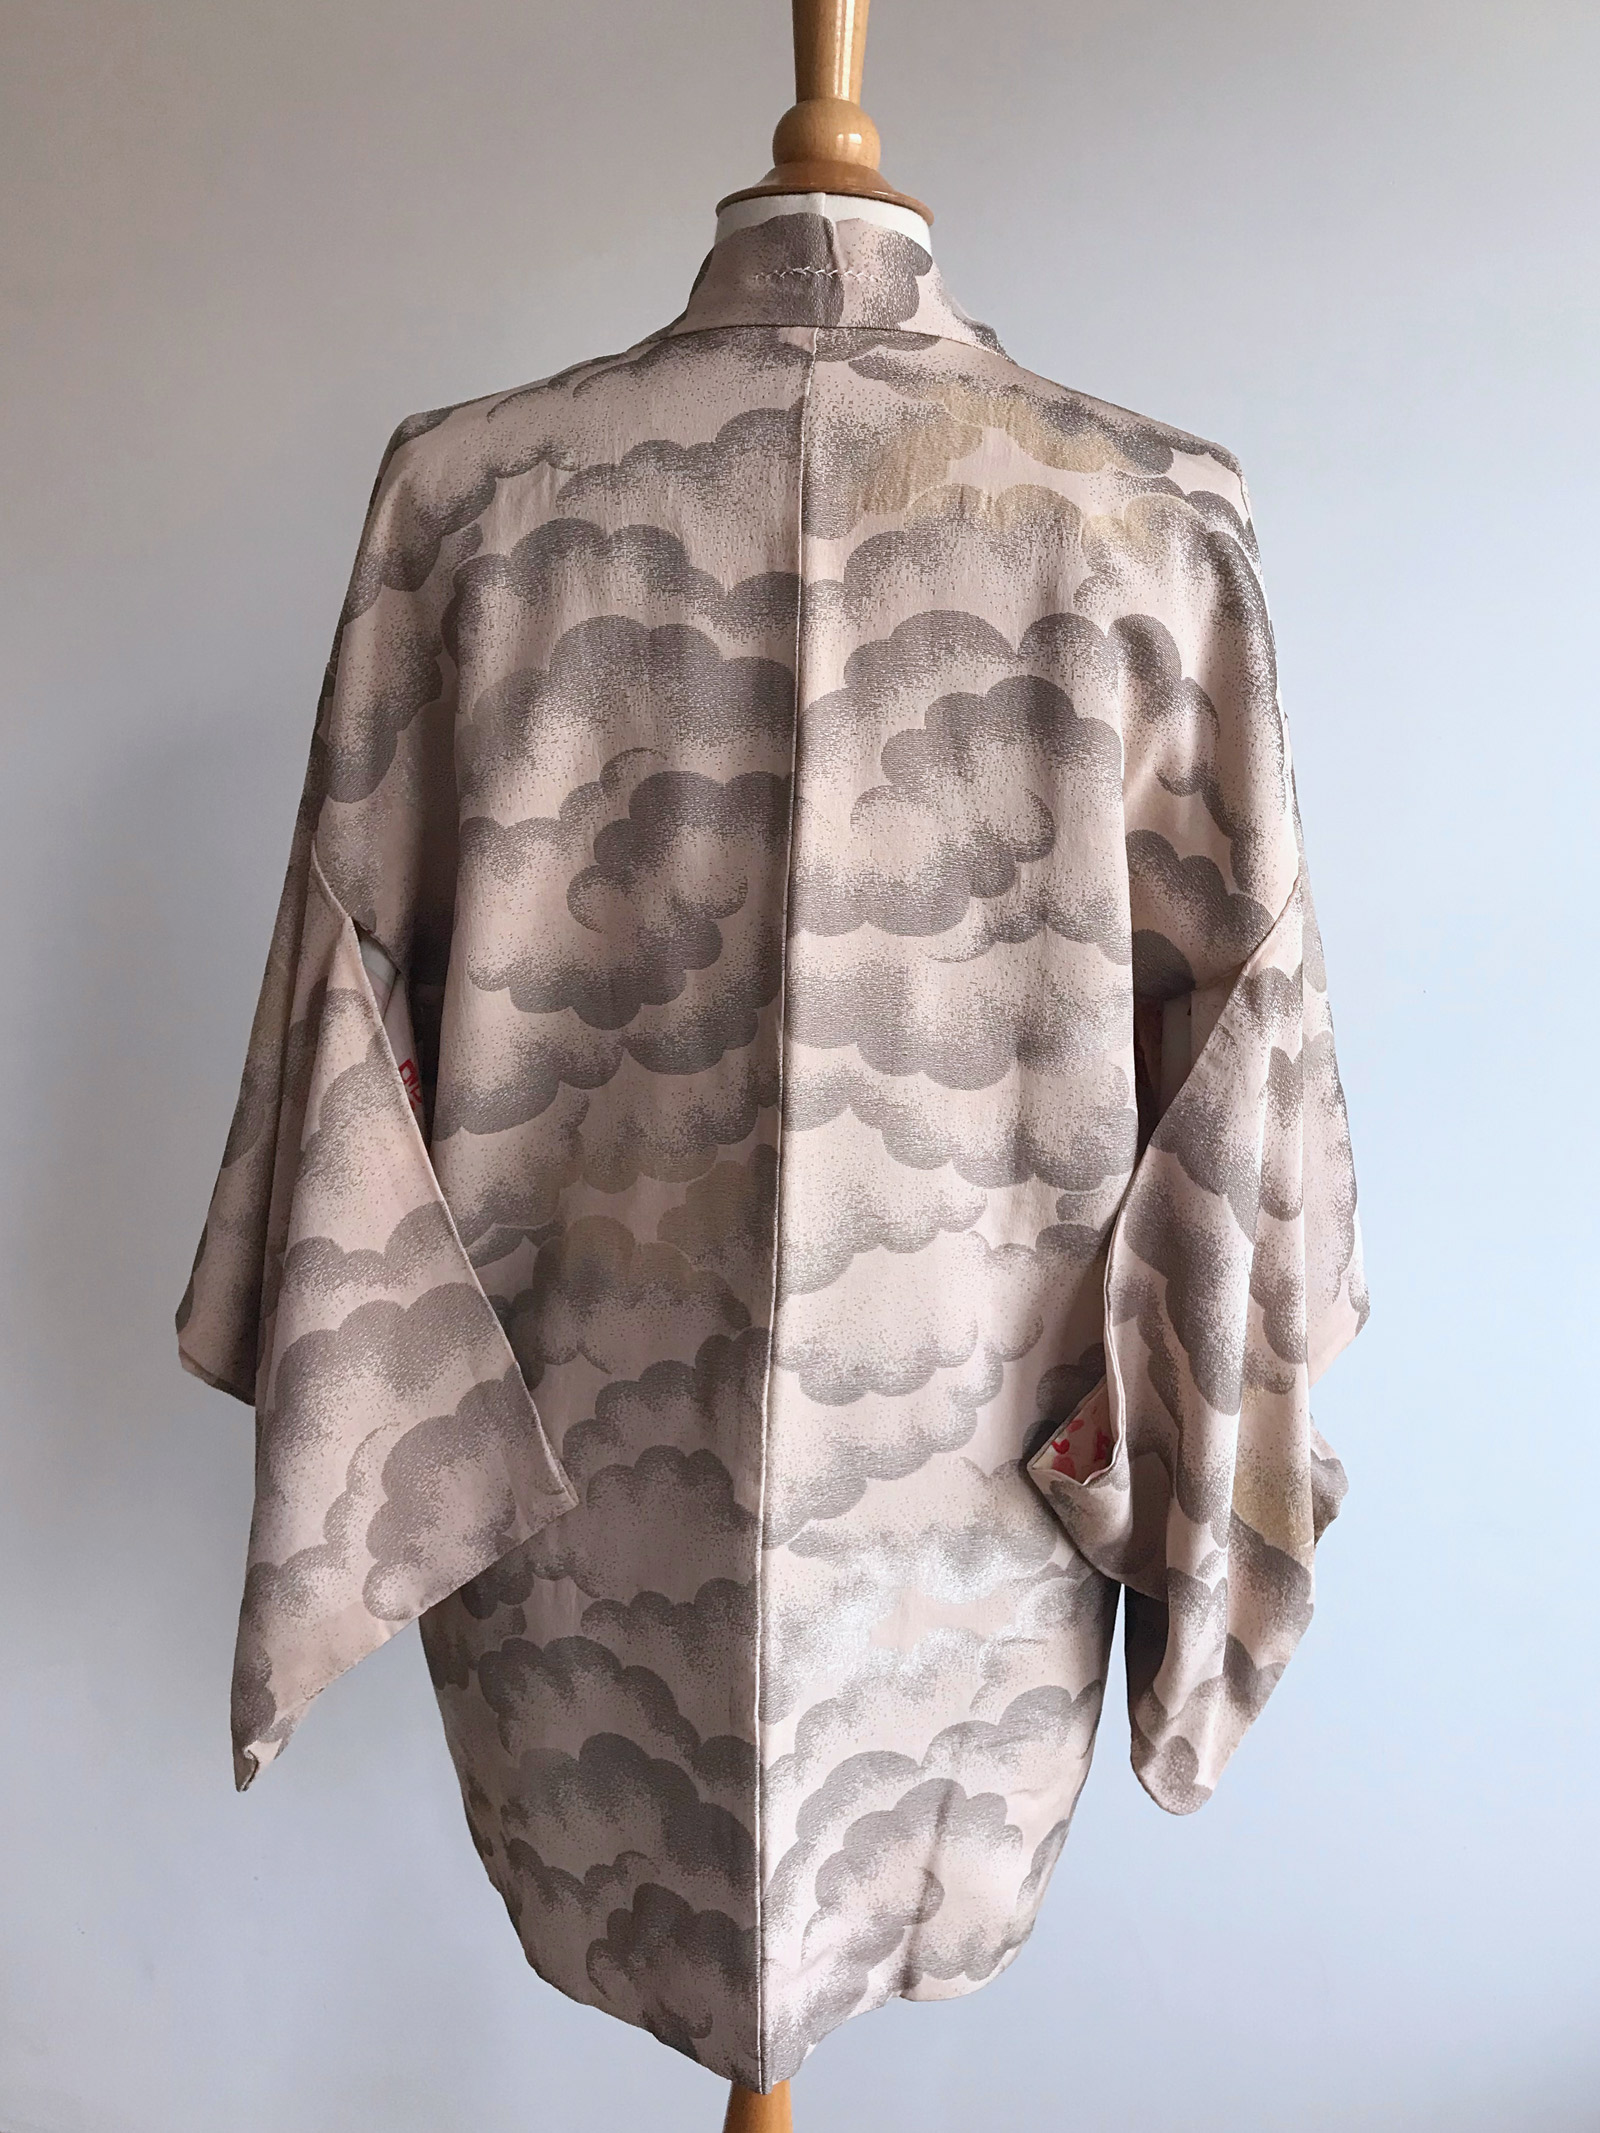 Kumo – all in the clouds with this beautiful Kimono Jacket